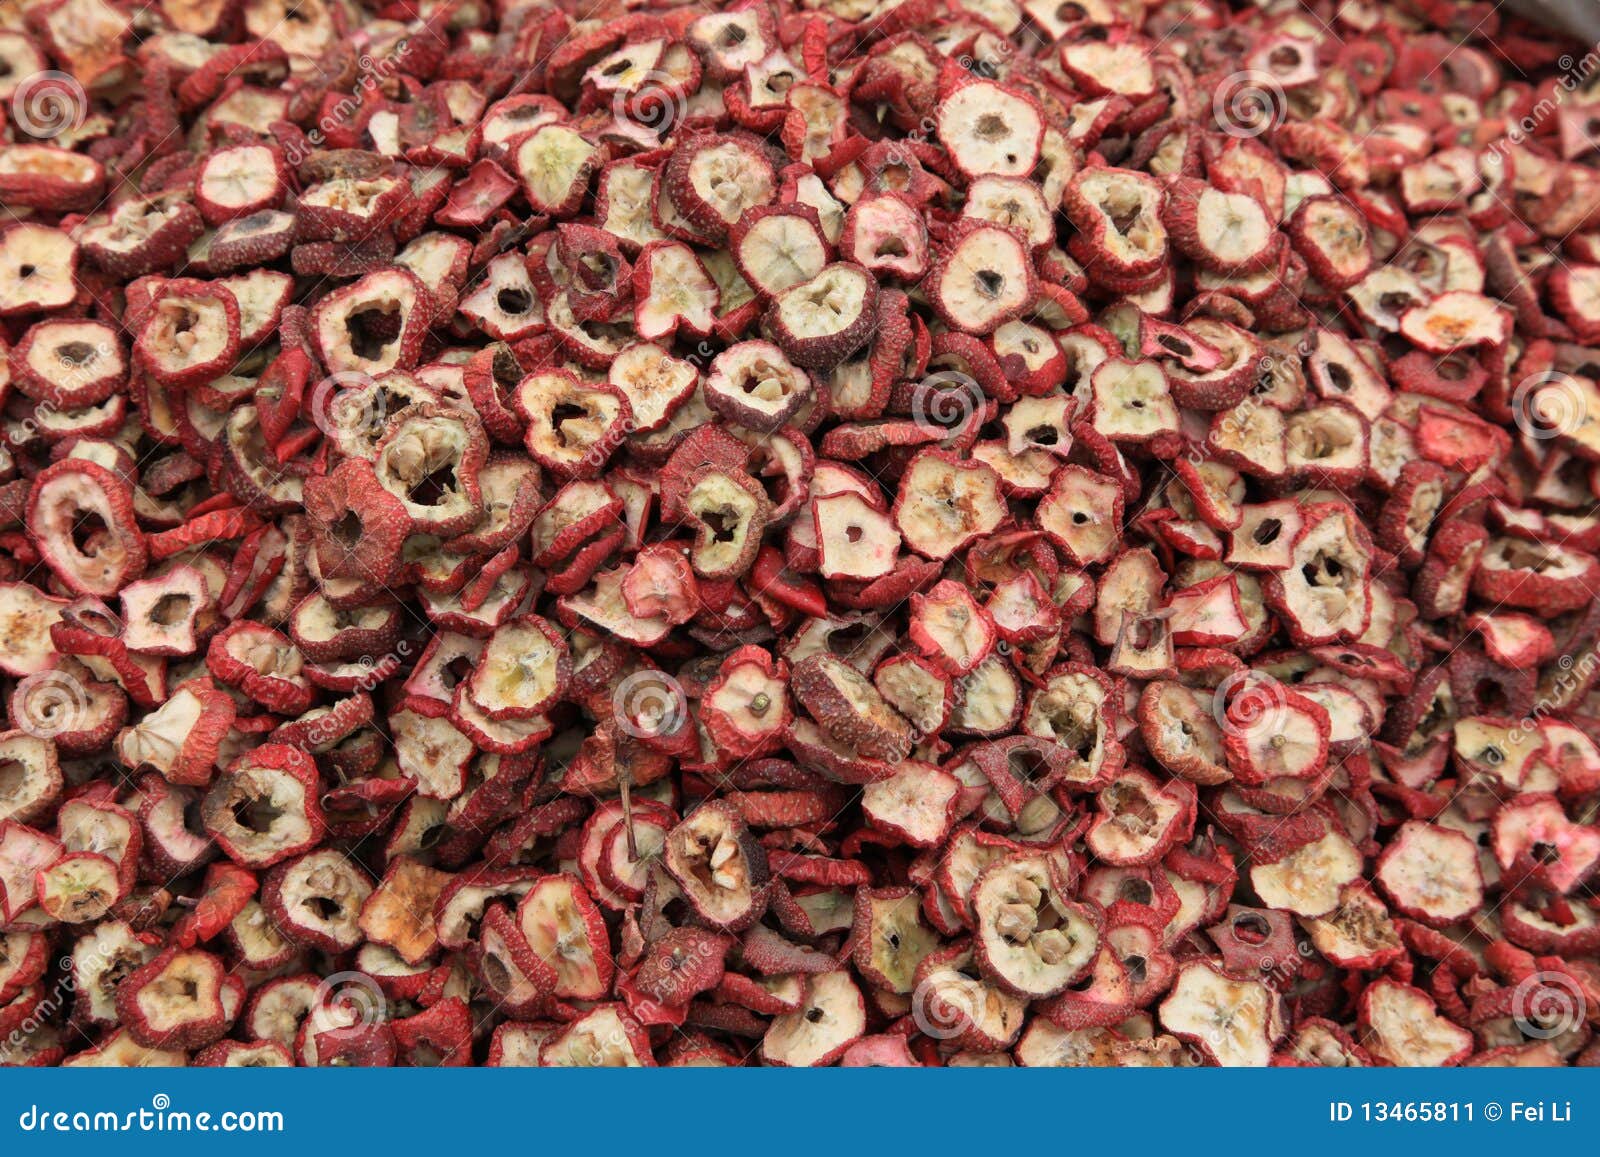 Dried hawkthorn slices are saling in a chinese marketã€‚